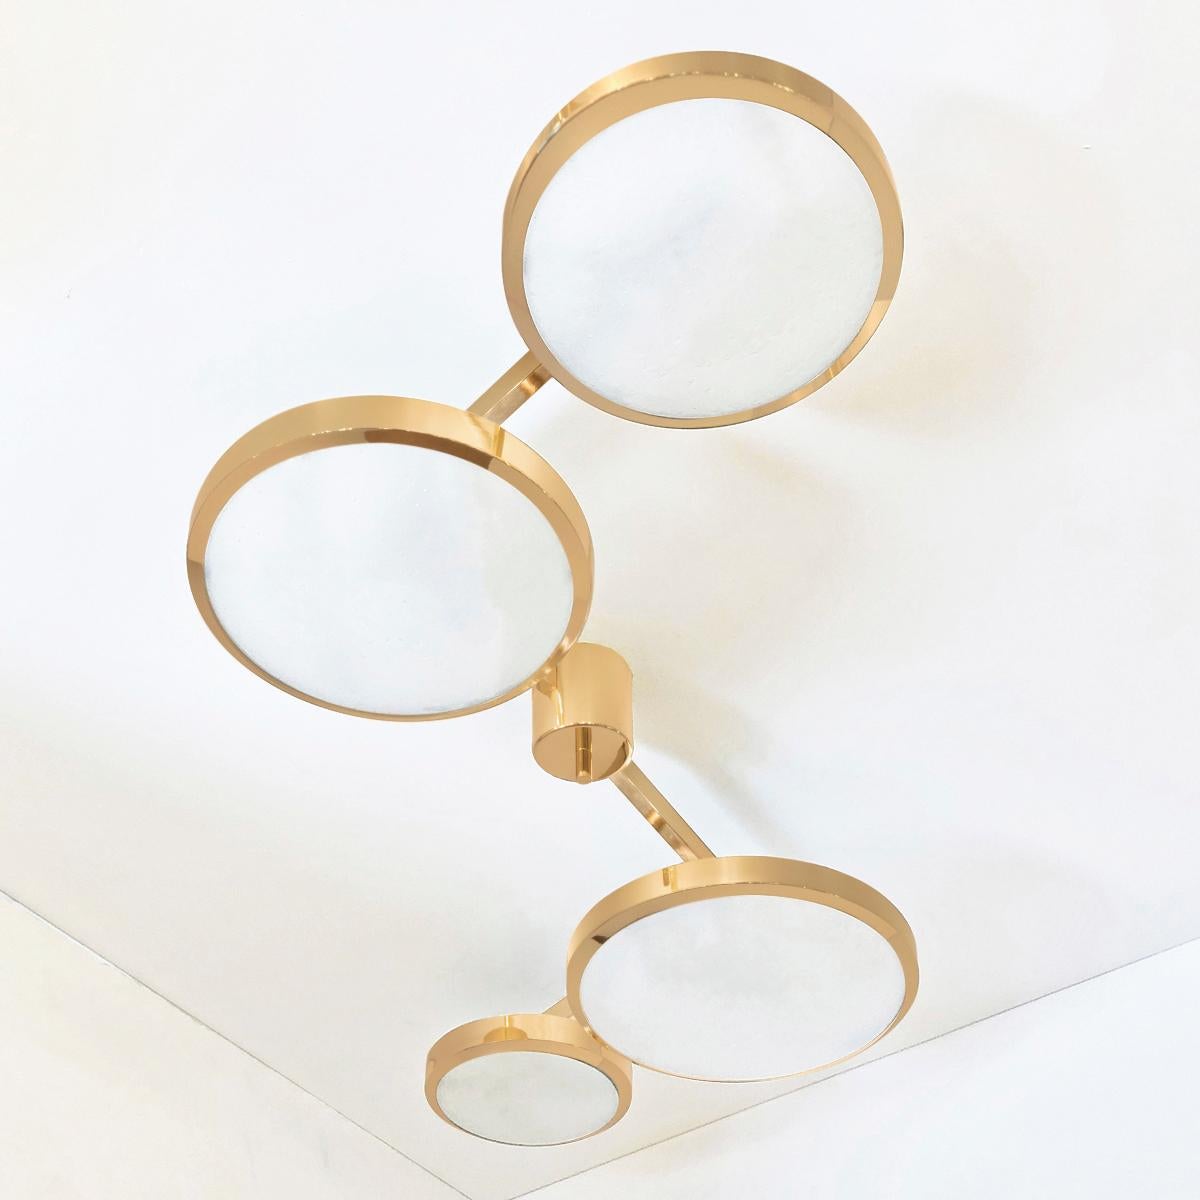 Modern Quattro Ceiling Light by Gaspare Asaro - Polished Brass Finish For Sale